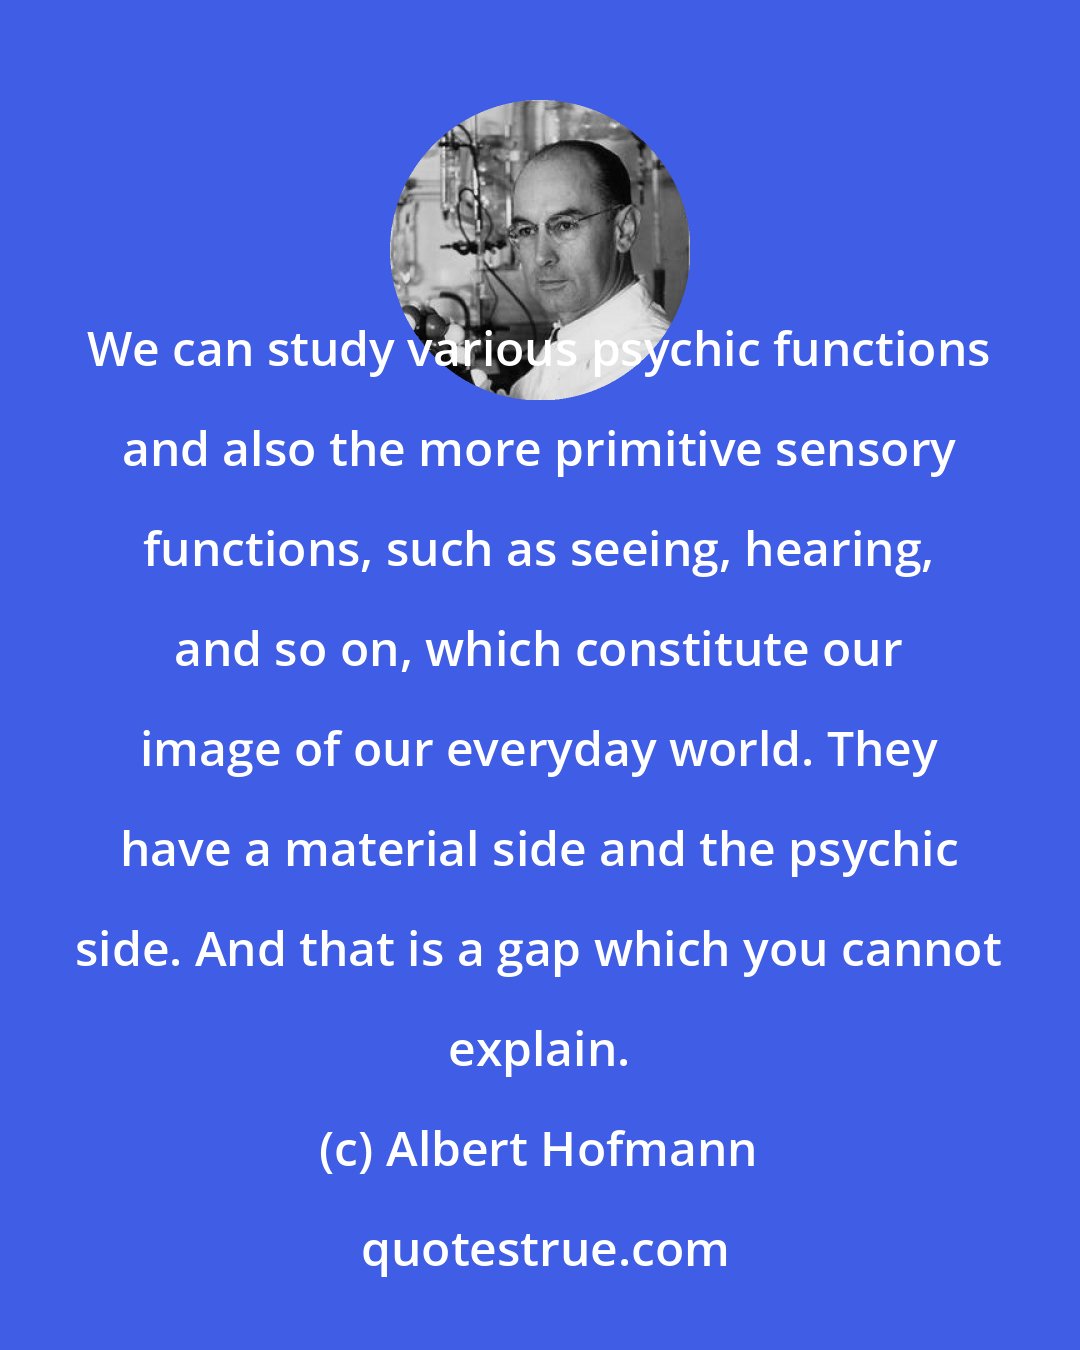 Albert Hofmann: We can study various psychic functions and also the more primitive sensory functions, such as seeing, hearing, and so on, which constitute our image of our everyday world. They have a material side and the psychic side. And that is a gap which you cannot explain.